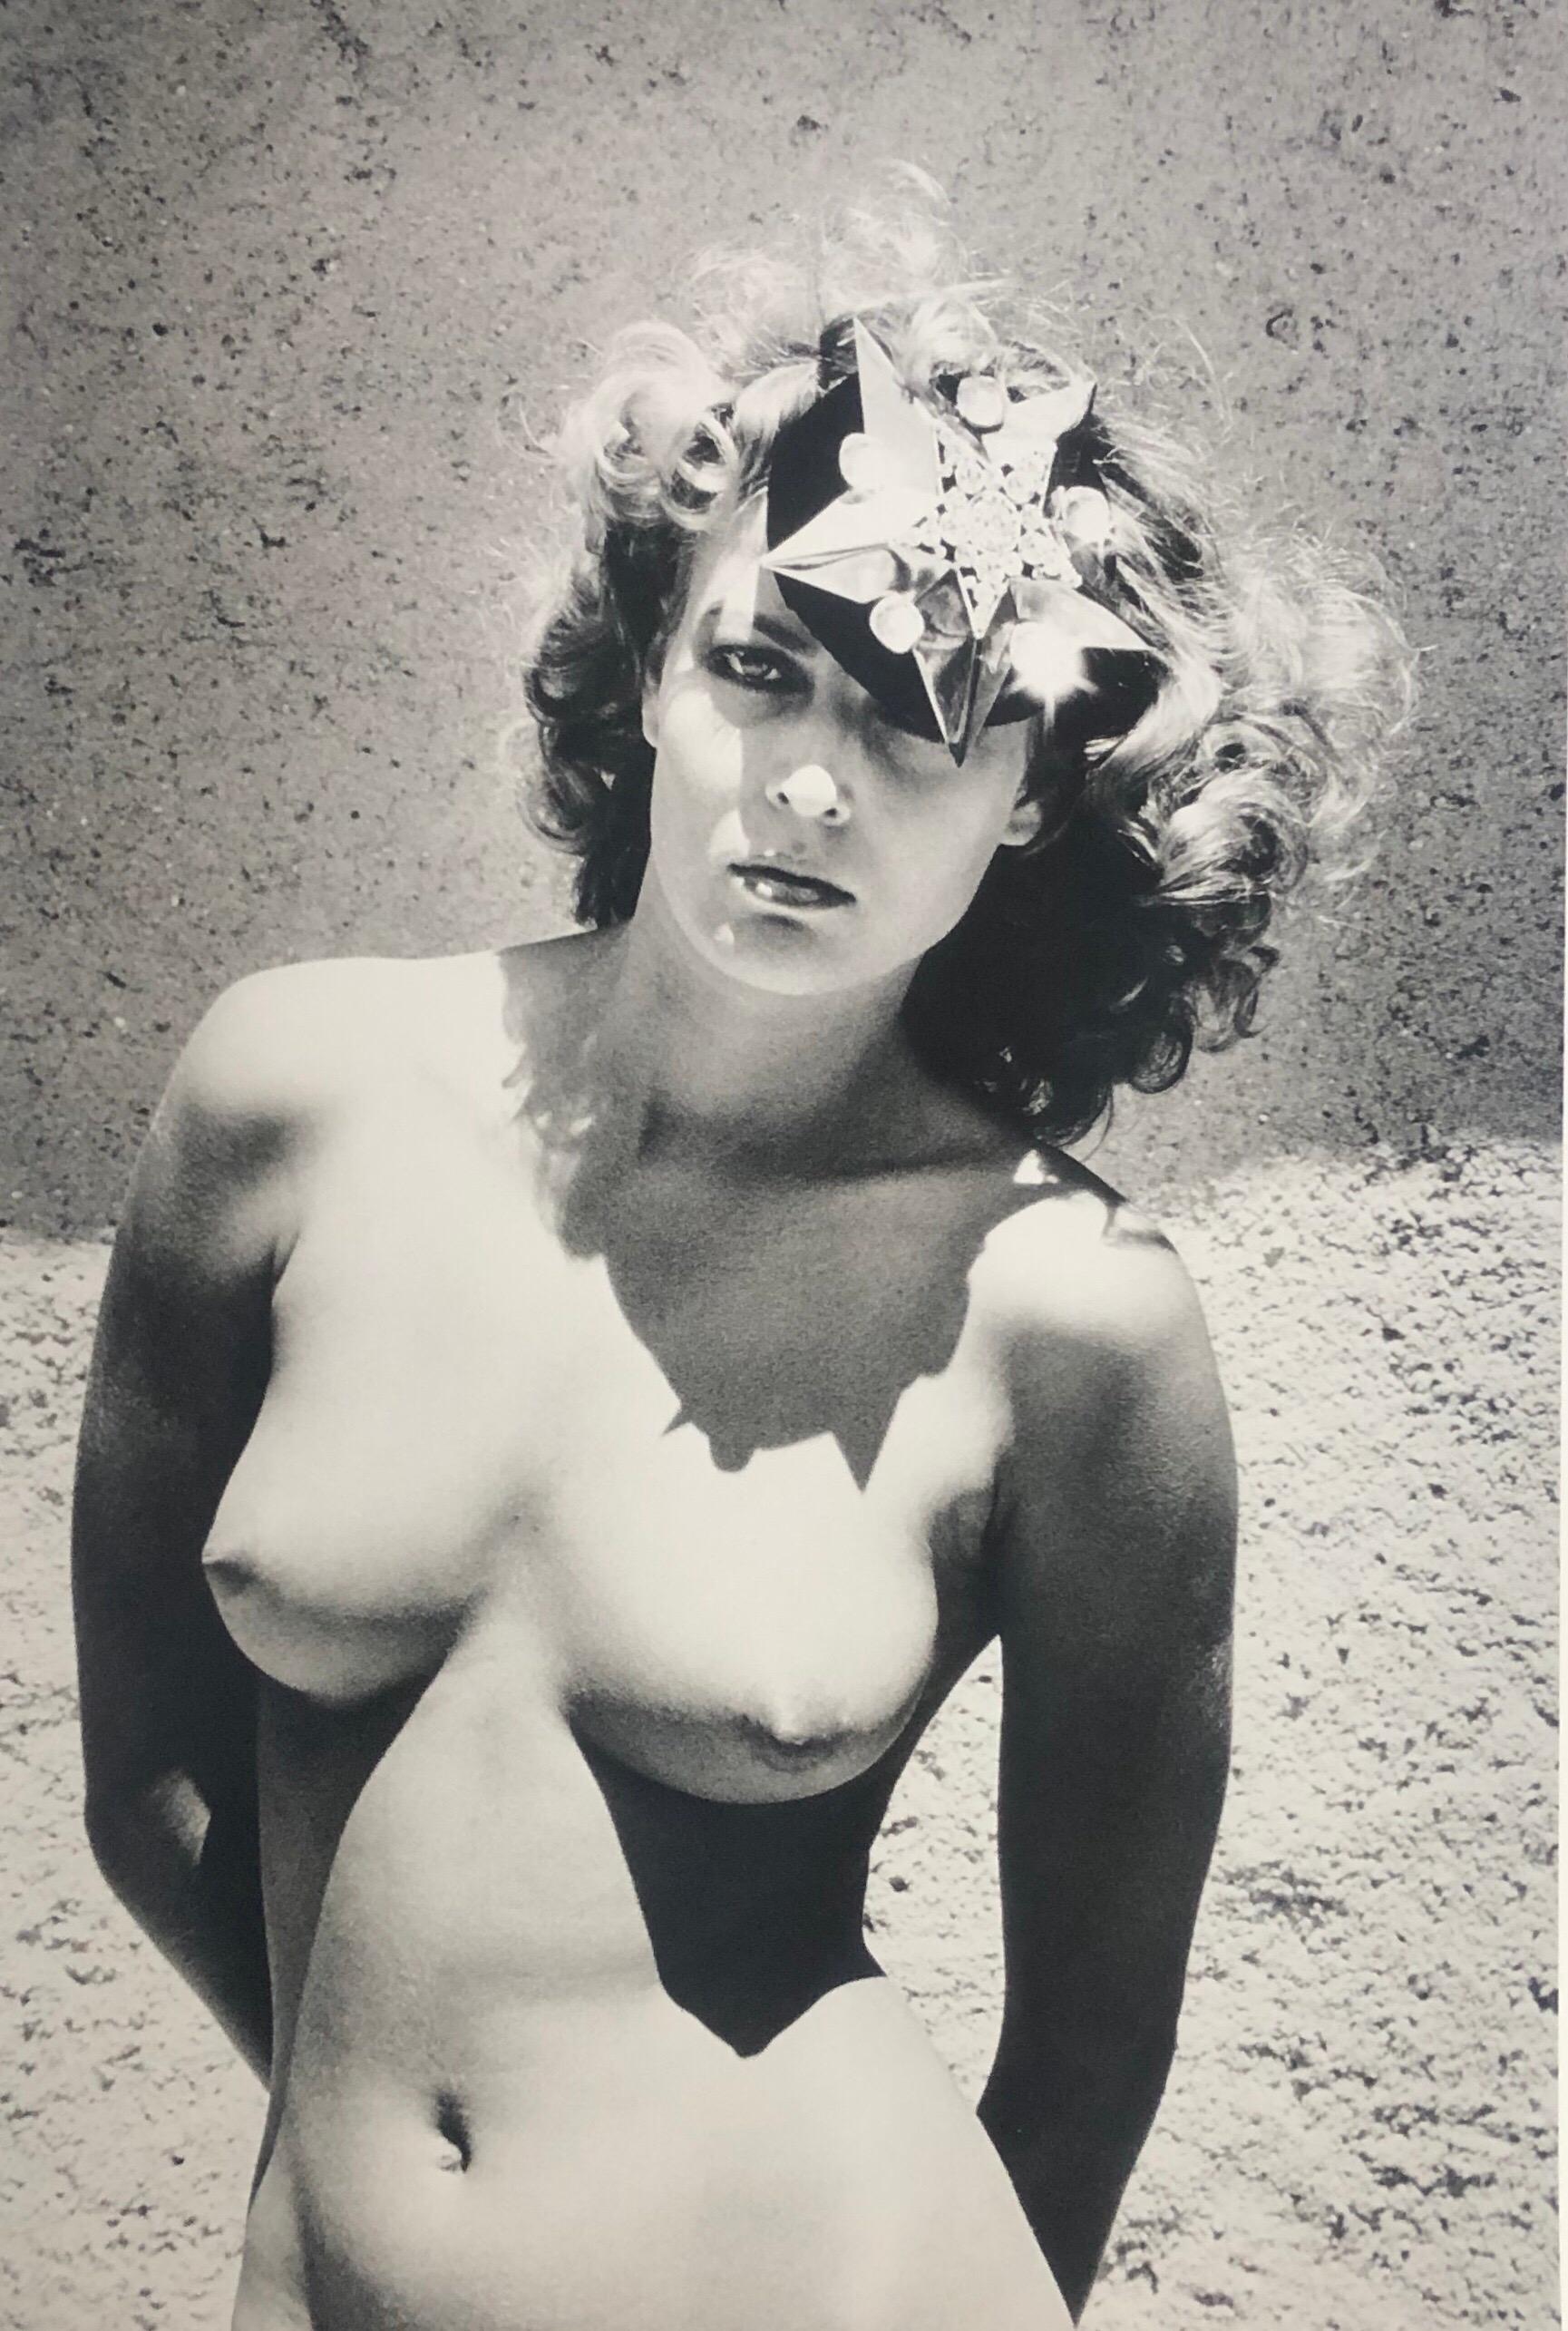 Original early 1980's vintage original silver gelatin print of one of the rarer images in the collection simply titled "Model in Hat'.  Image depicts a playful model in nothing but an elegant hat believed to be shot by Newton in the late 1960' in